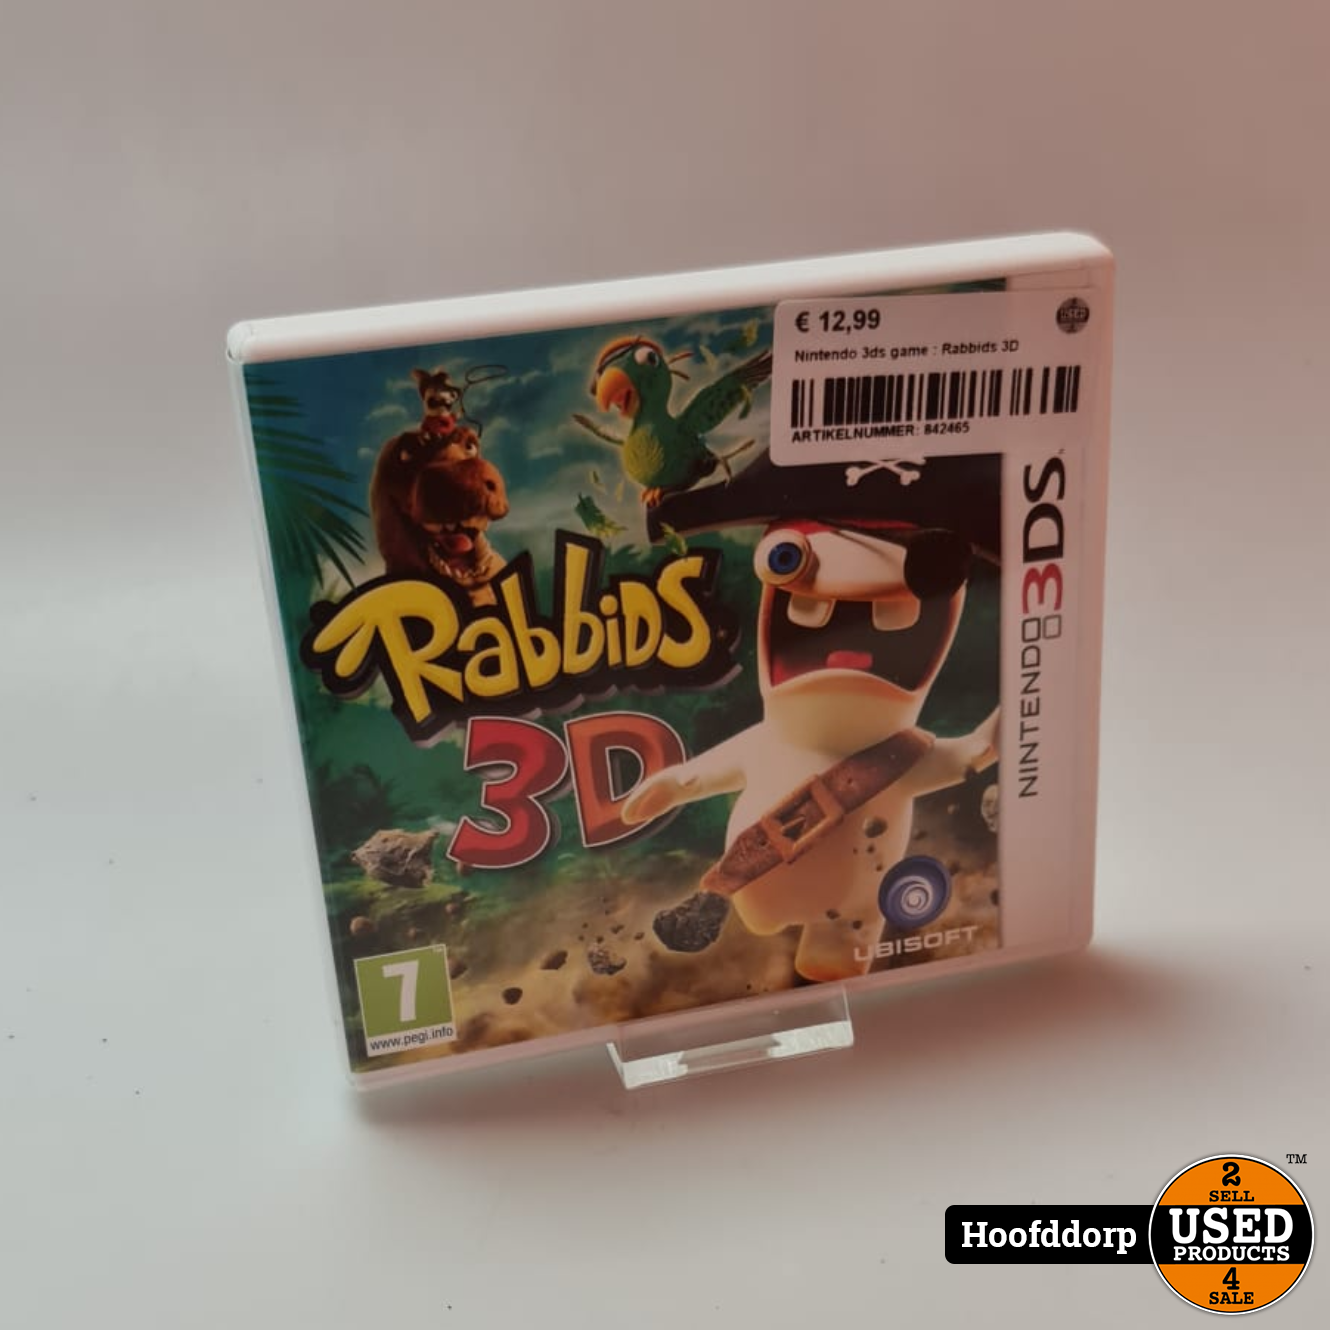 Nintendo 3ds game Rabbids 3D Used Products Hoofddorp